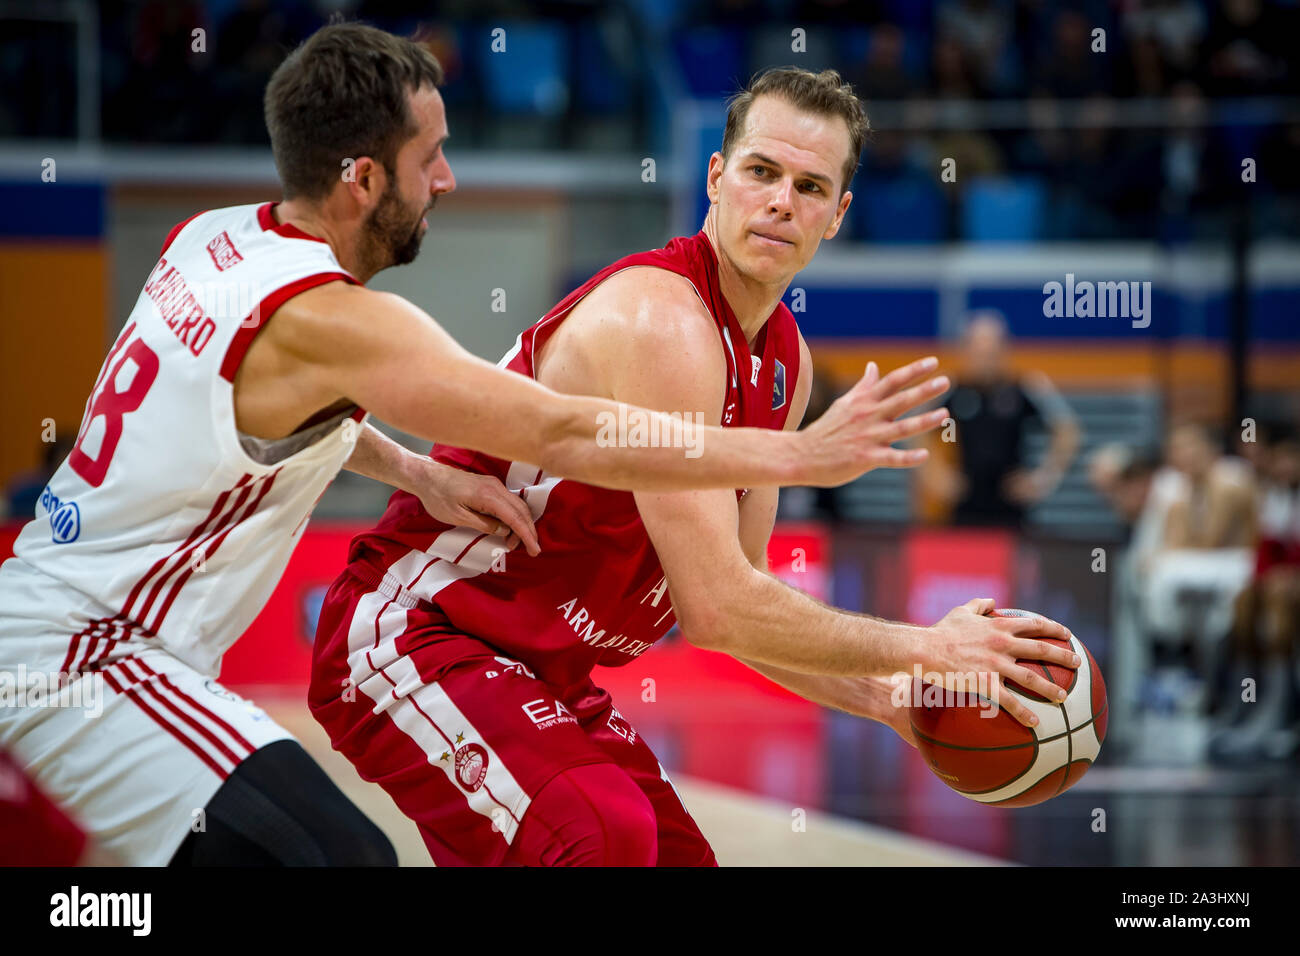 Milano, Italy. 07th Oct, 2019. Michael Roll (AX Armani Exchange Olimpia Milano) during Legabasket Serie A basketball match AX Armani Exchange Olimpia Milano vs Pallacanestro Trieste in Milano, Palalido Allianz Cloud, the home team won 88-74. Italy 6th October 2019. (Photo by Matteo Cogliati/Pacific Press) Credit: Pacific Press Agency/Alamy Live News Stock Photo